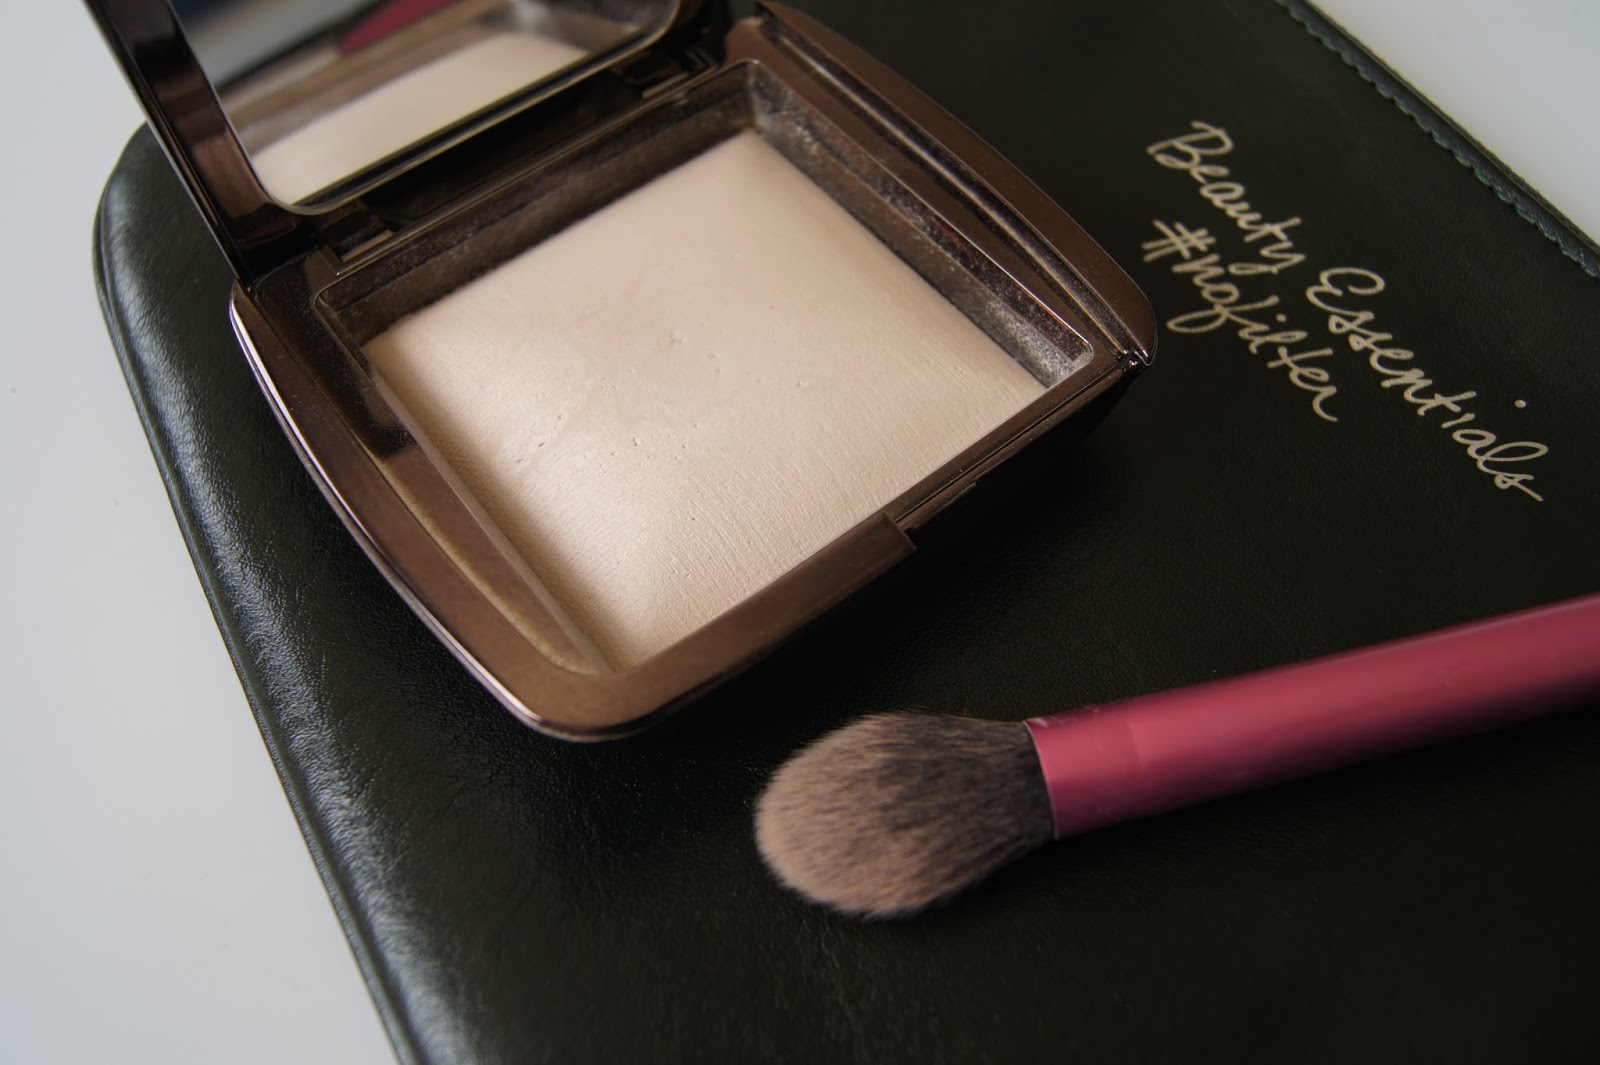 Hourglass ambient lighting powder in ethereal light review